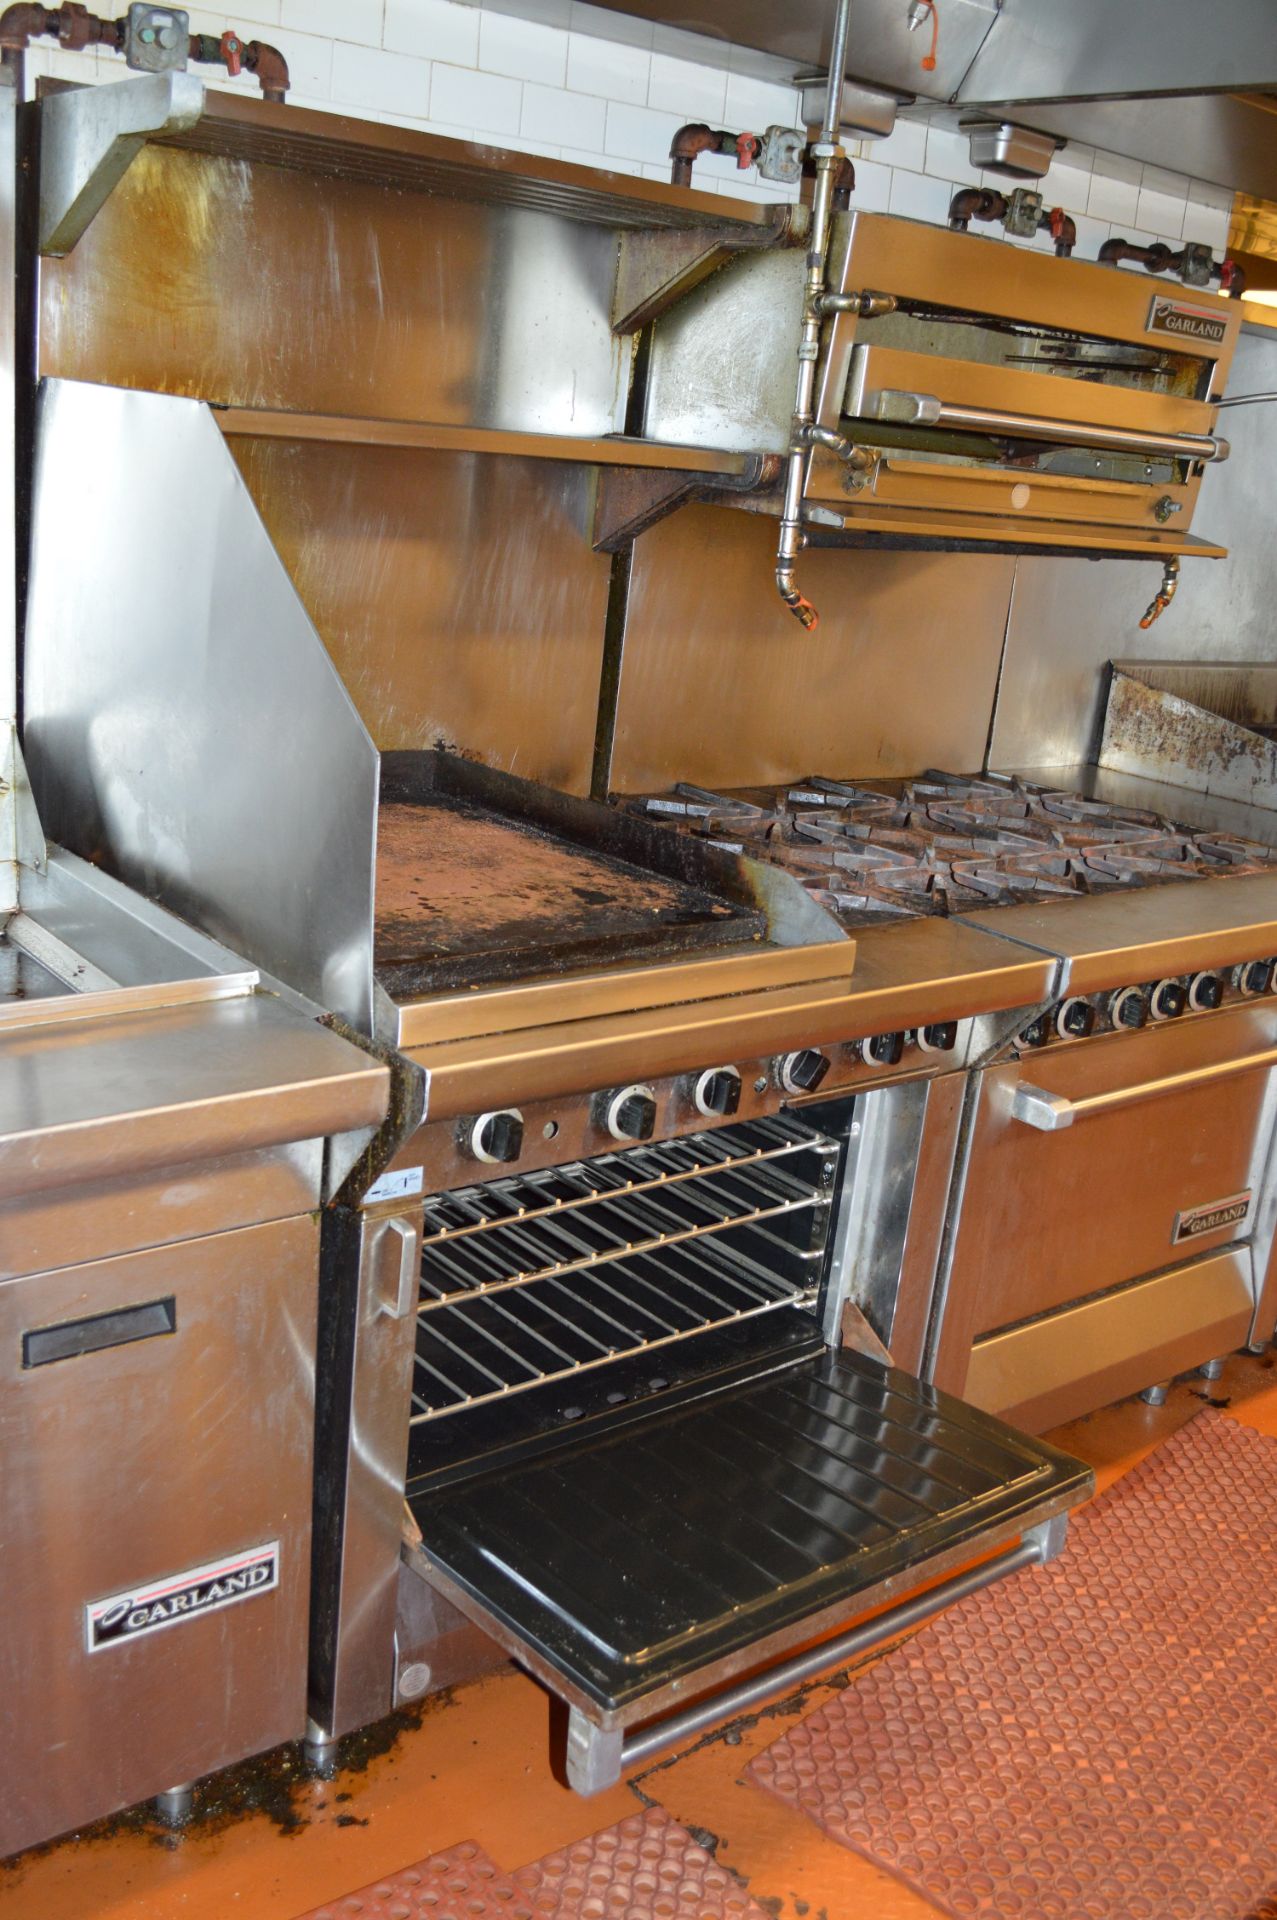 GARLAND 2 FOOT GRIDDLE WITH 2 BURNERS WITH STANDARD OVEN - Image 3 of 4